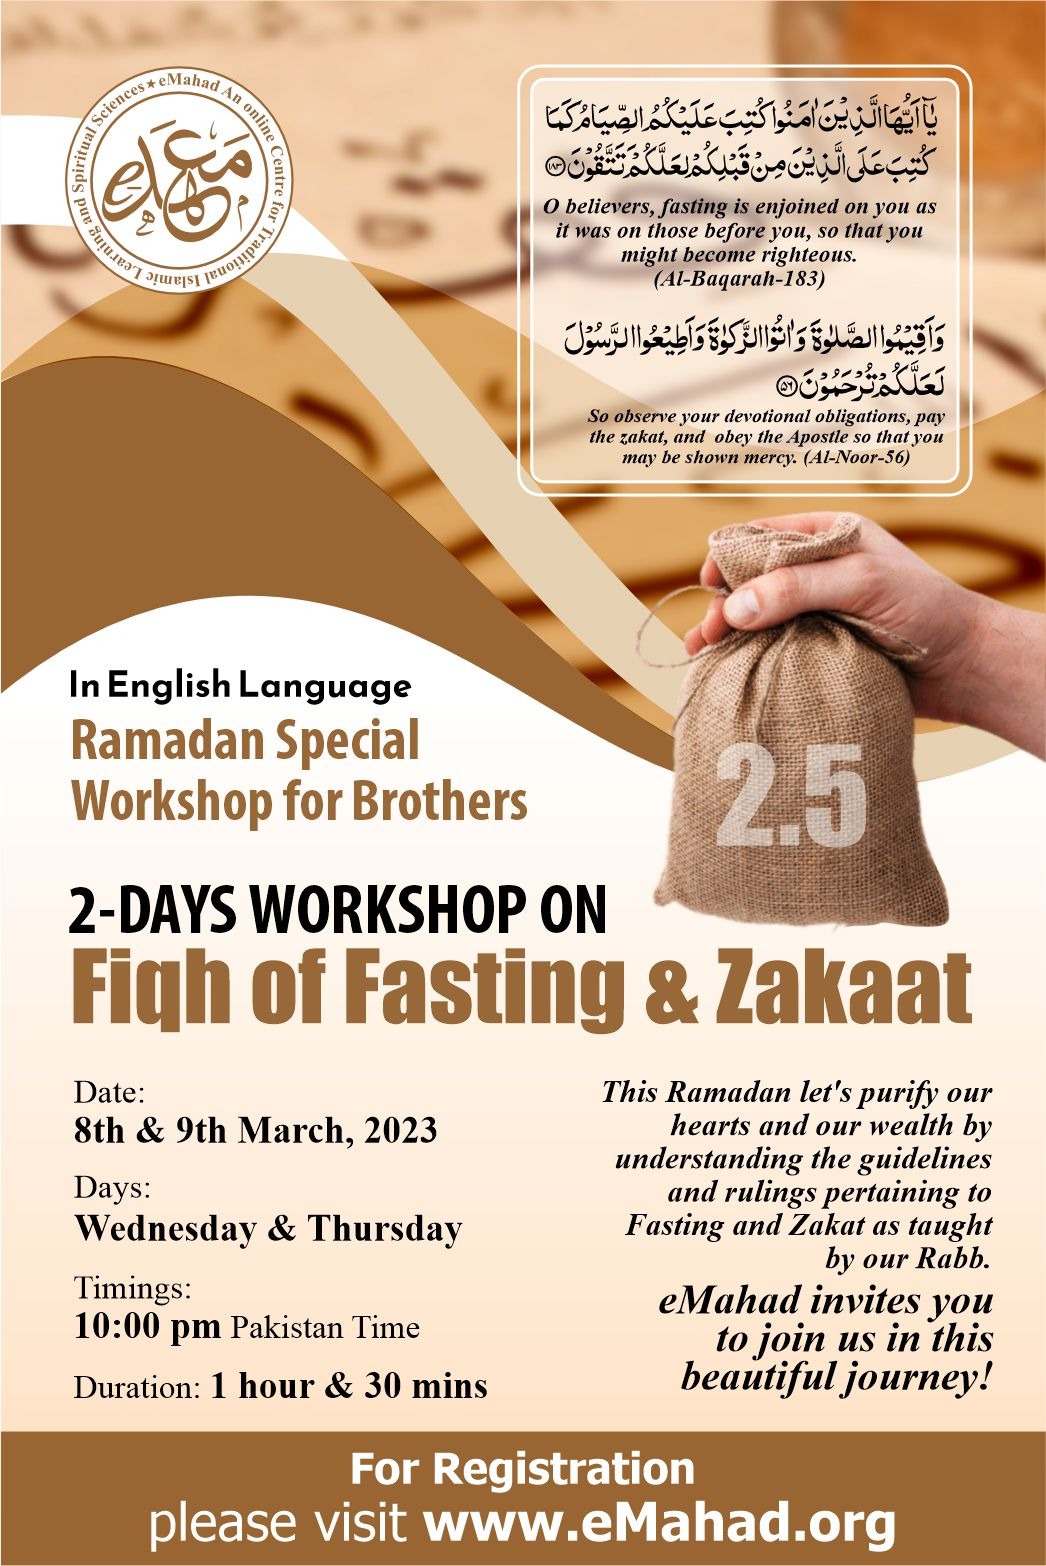 2-Days Workshop on Fiqh for Fasting and Zakat 2023  |  For Brothers Only  |  In English Language  |  Free Ramadan Special Course